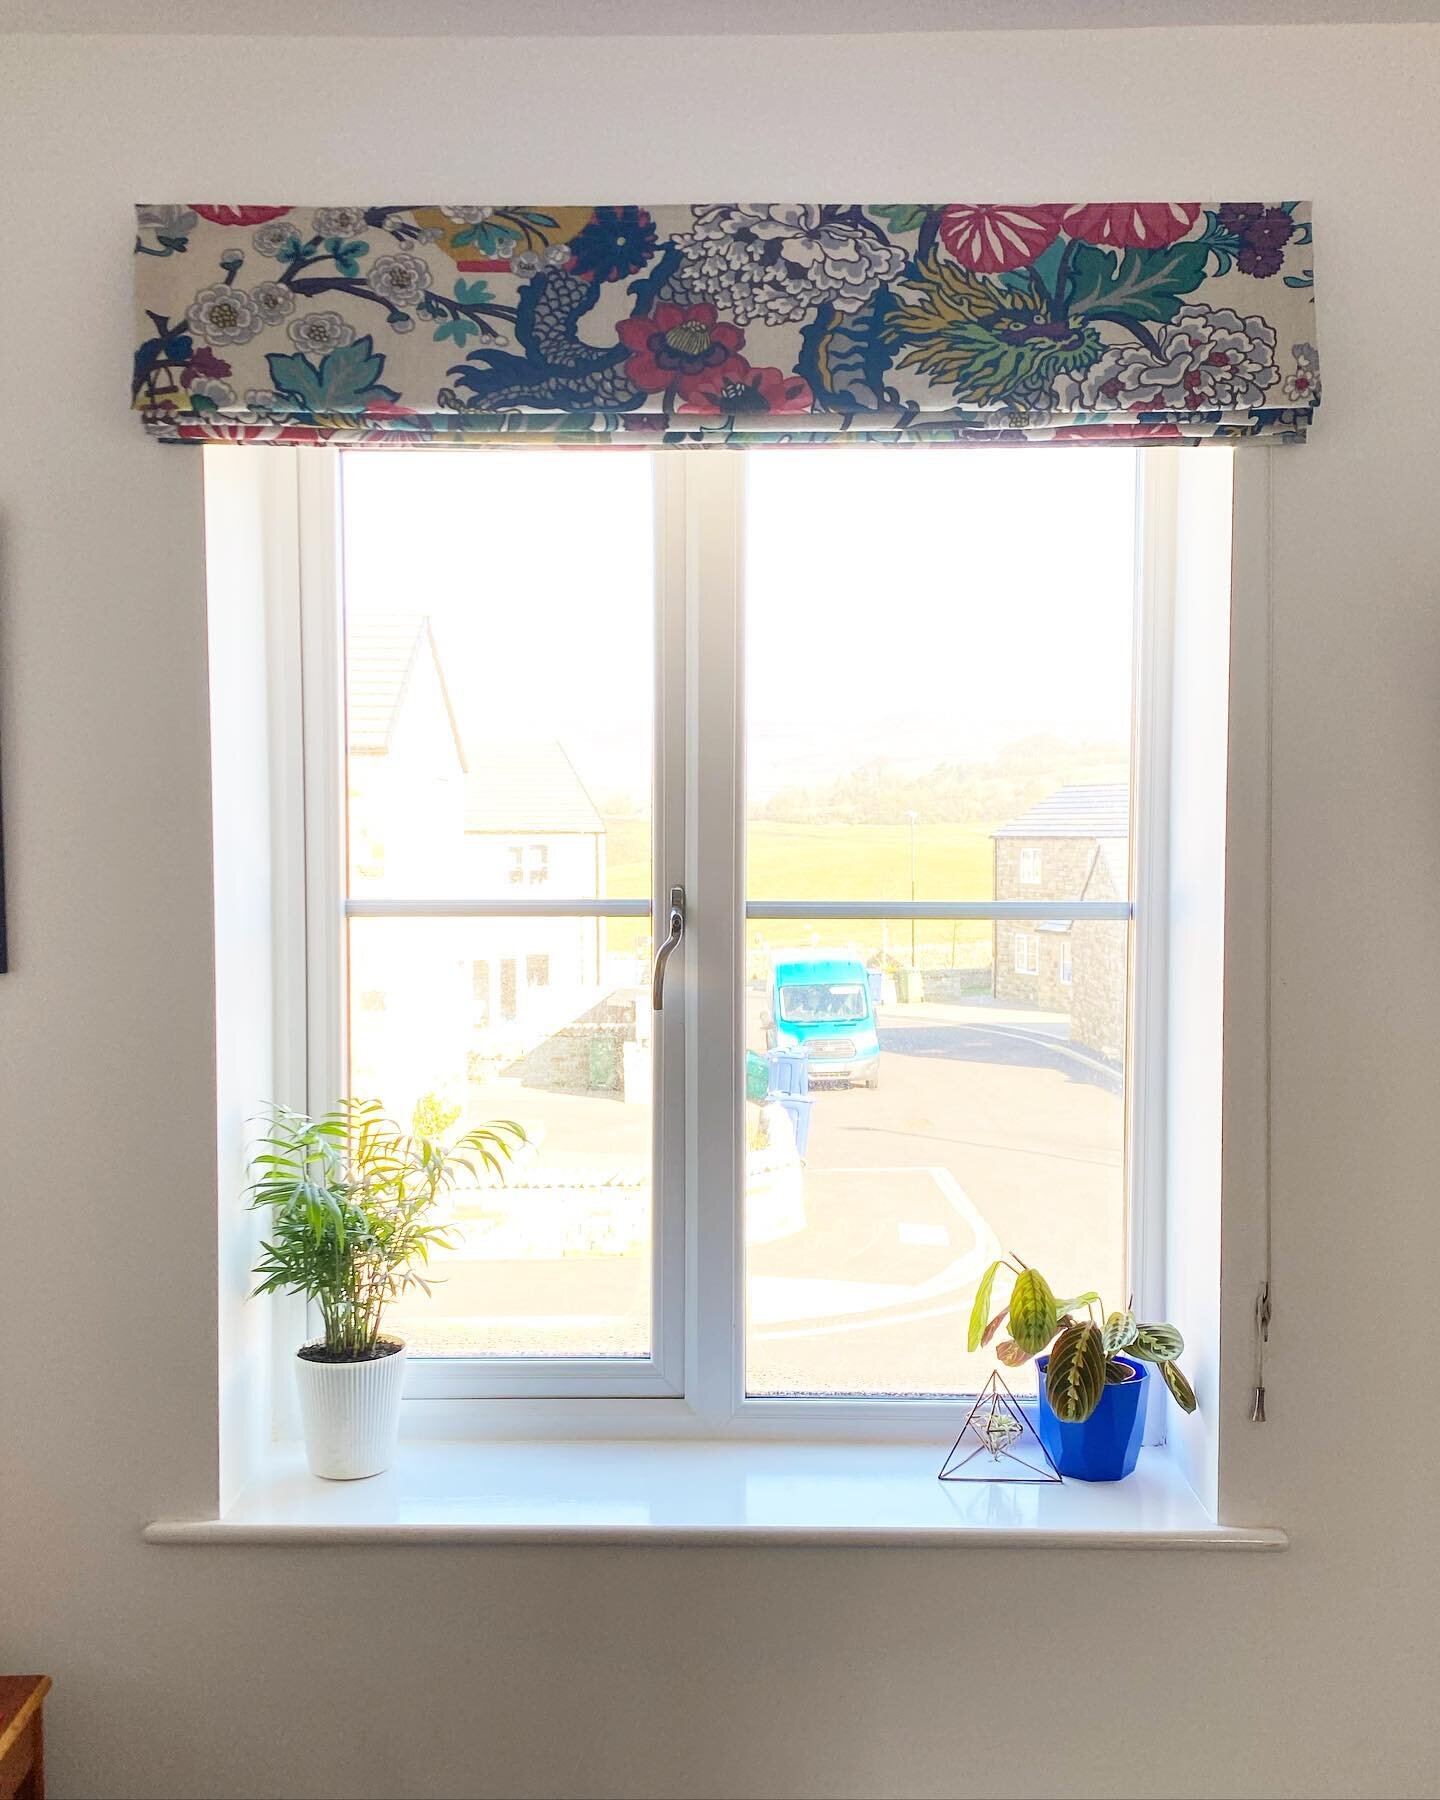 Another set of Roman blinds fitted! Made from the clients own beautiful Schumacher fabric. #romanblinds #schumacher #chiangmaidragonfabric #fabric #schumacherfabrics #handmadeblinds #handmadecurtainsandblinds #curtainmaker #skipton #yorkshire #northy